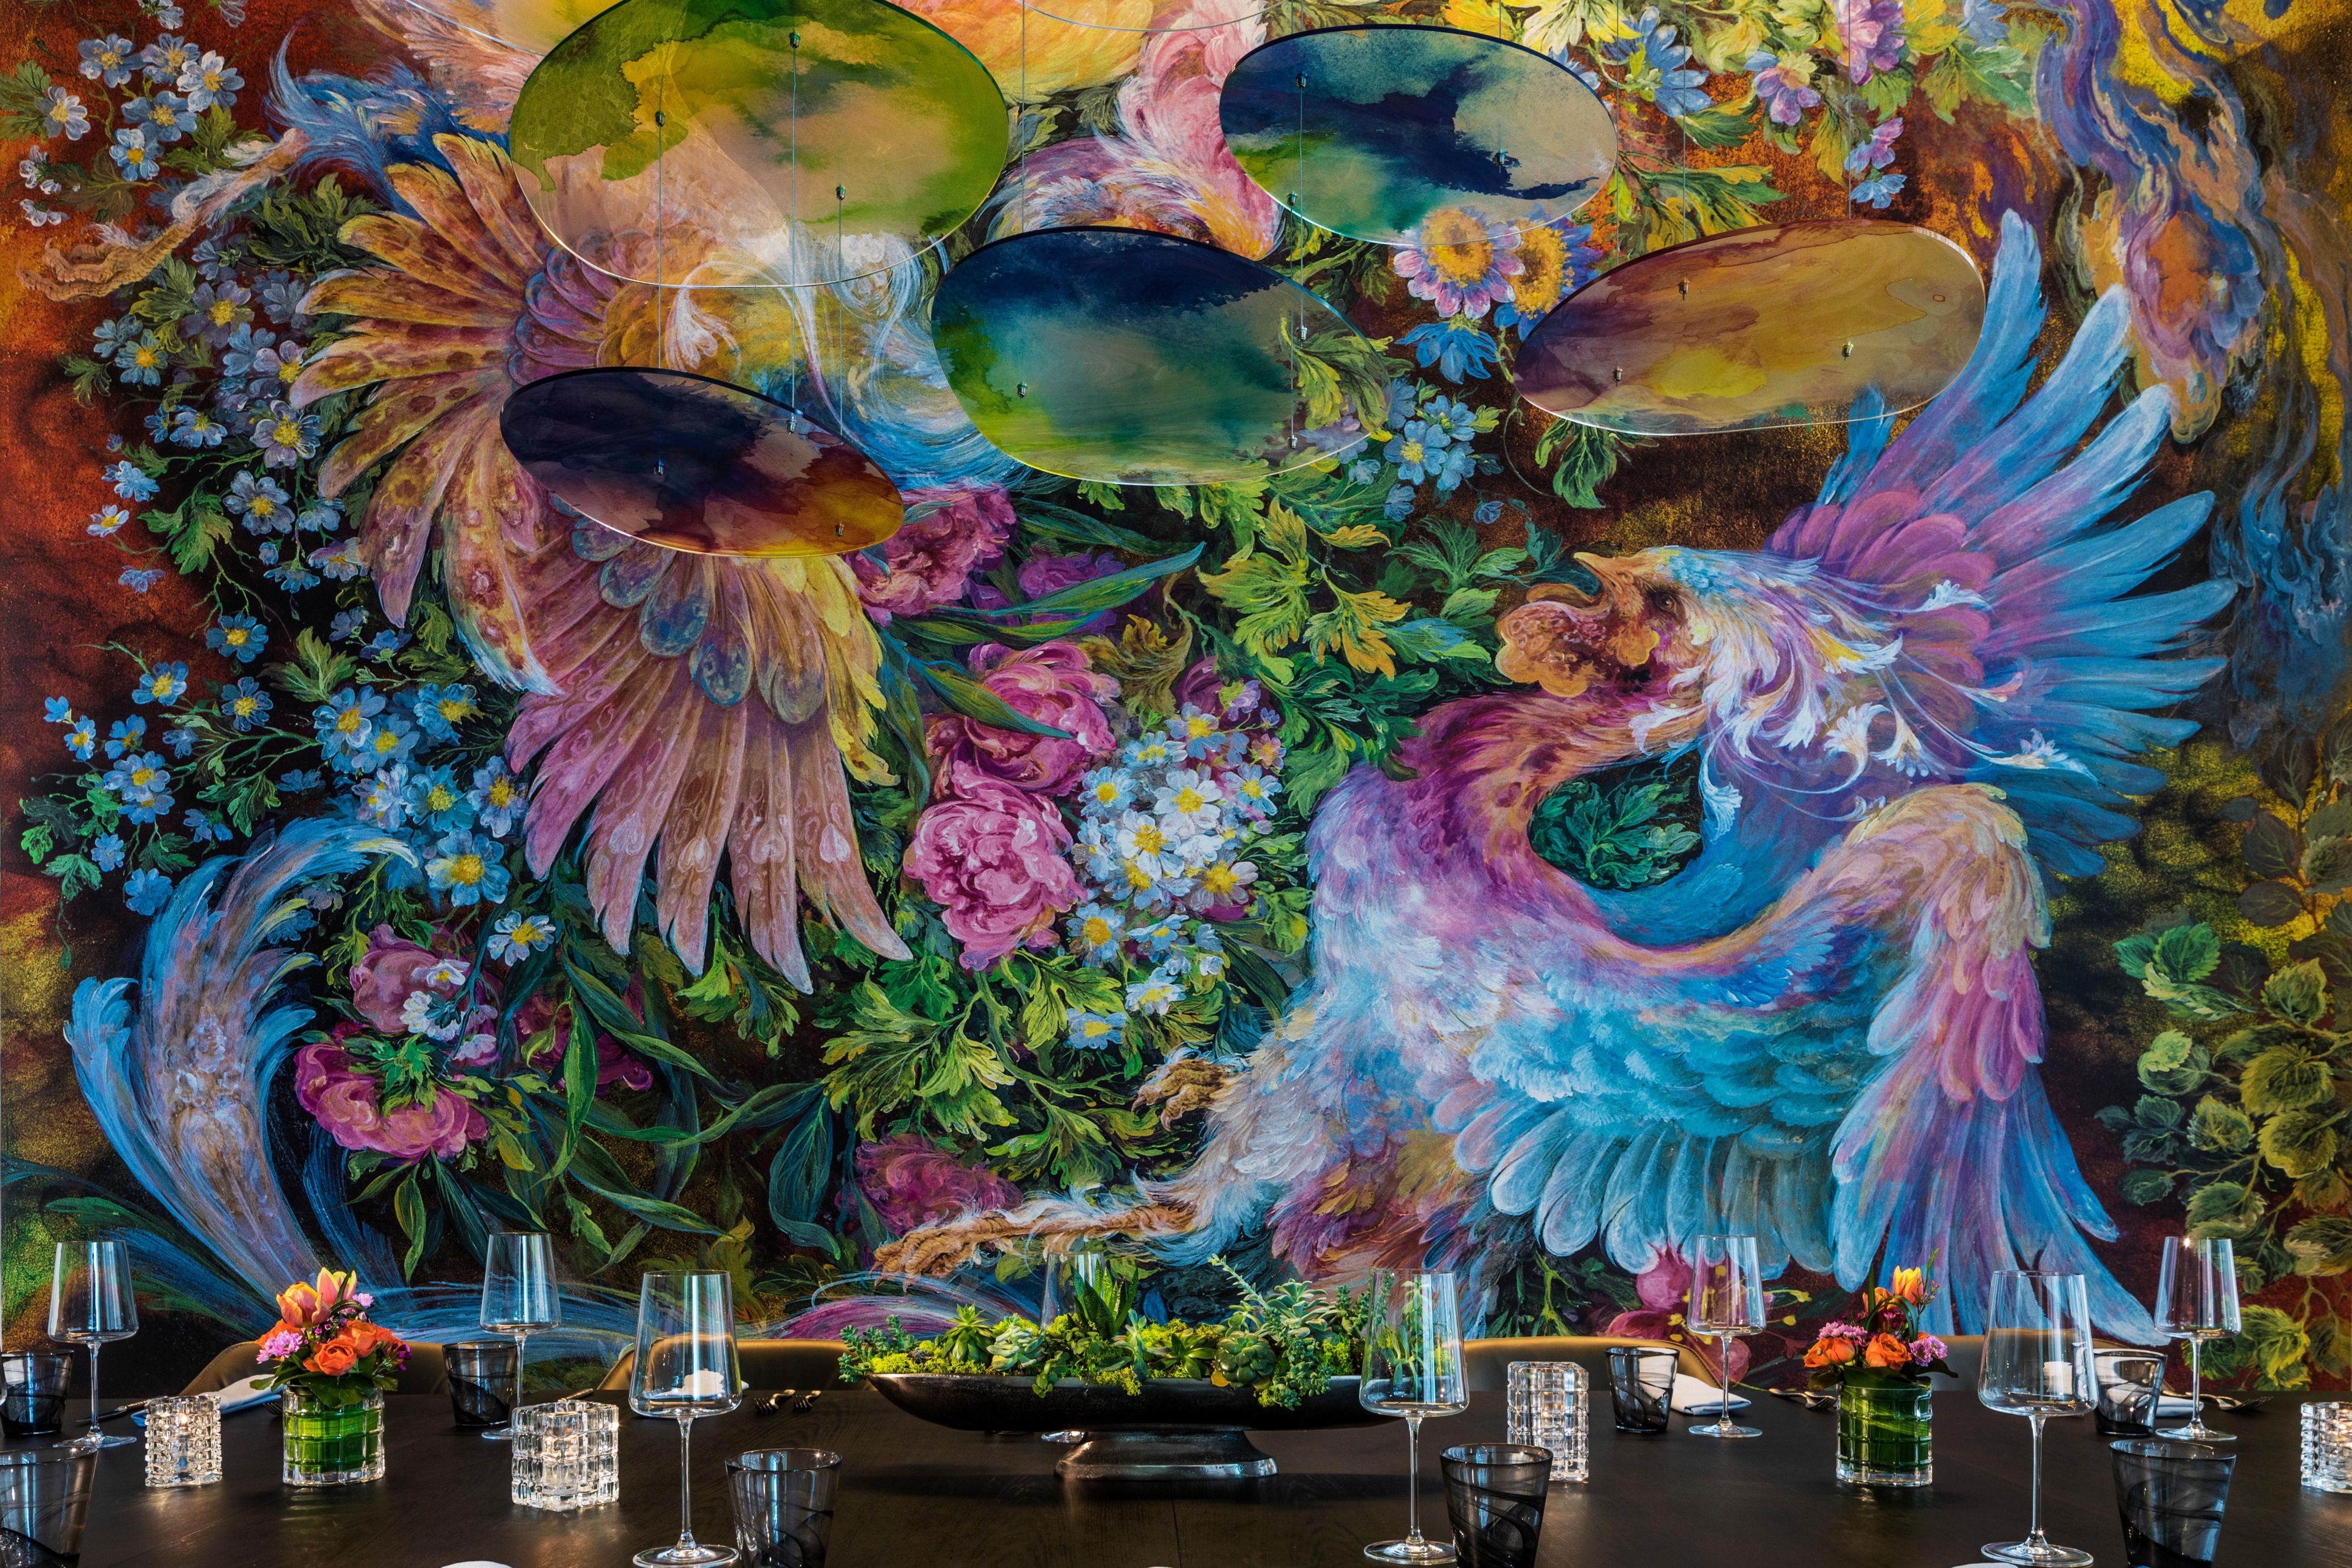 Our private dining room at Safina features amazing original art.